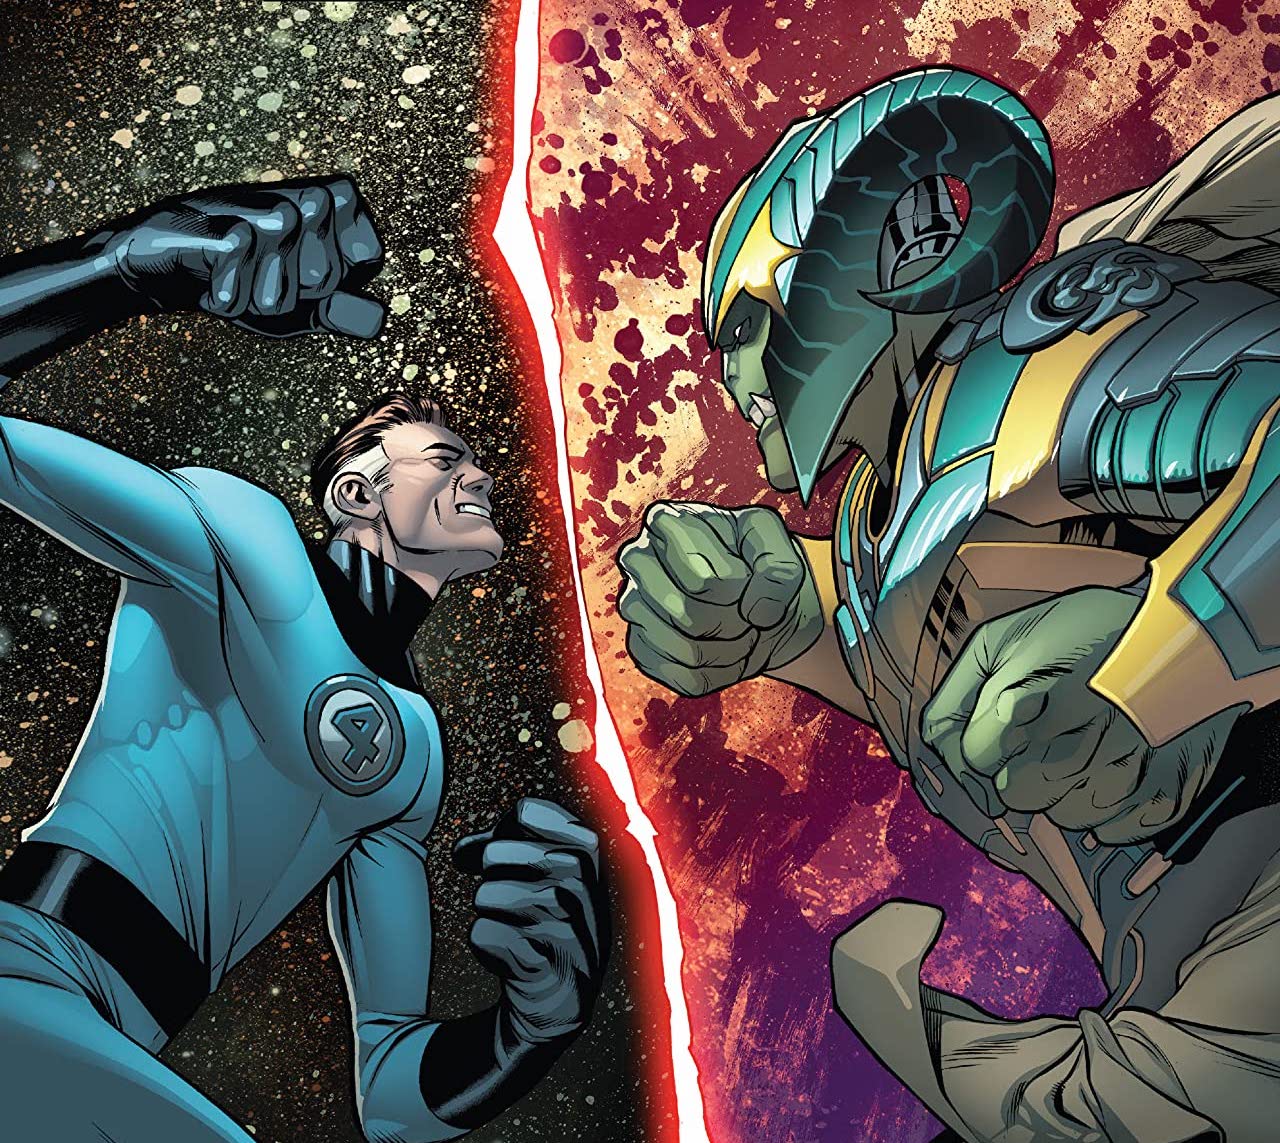 'Fantastic Four' #40 sets the stage for the Watchers